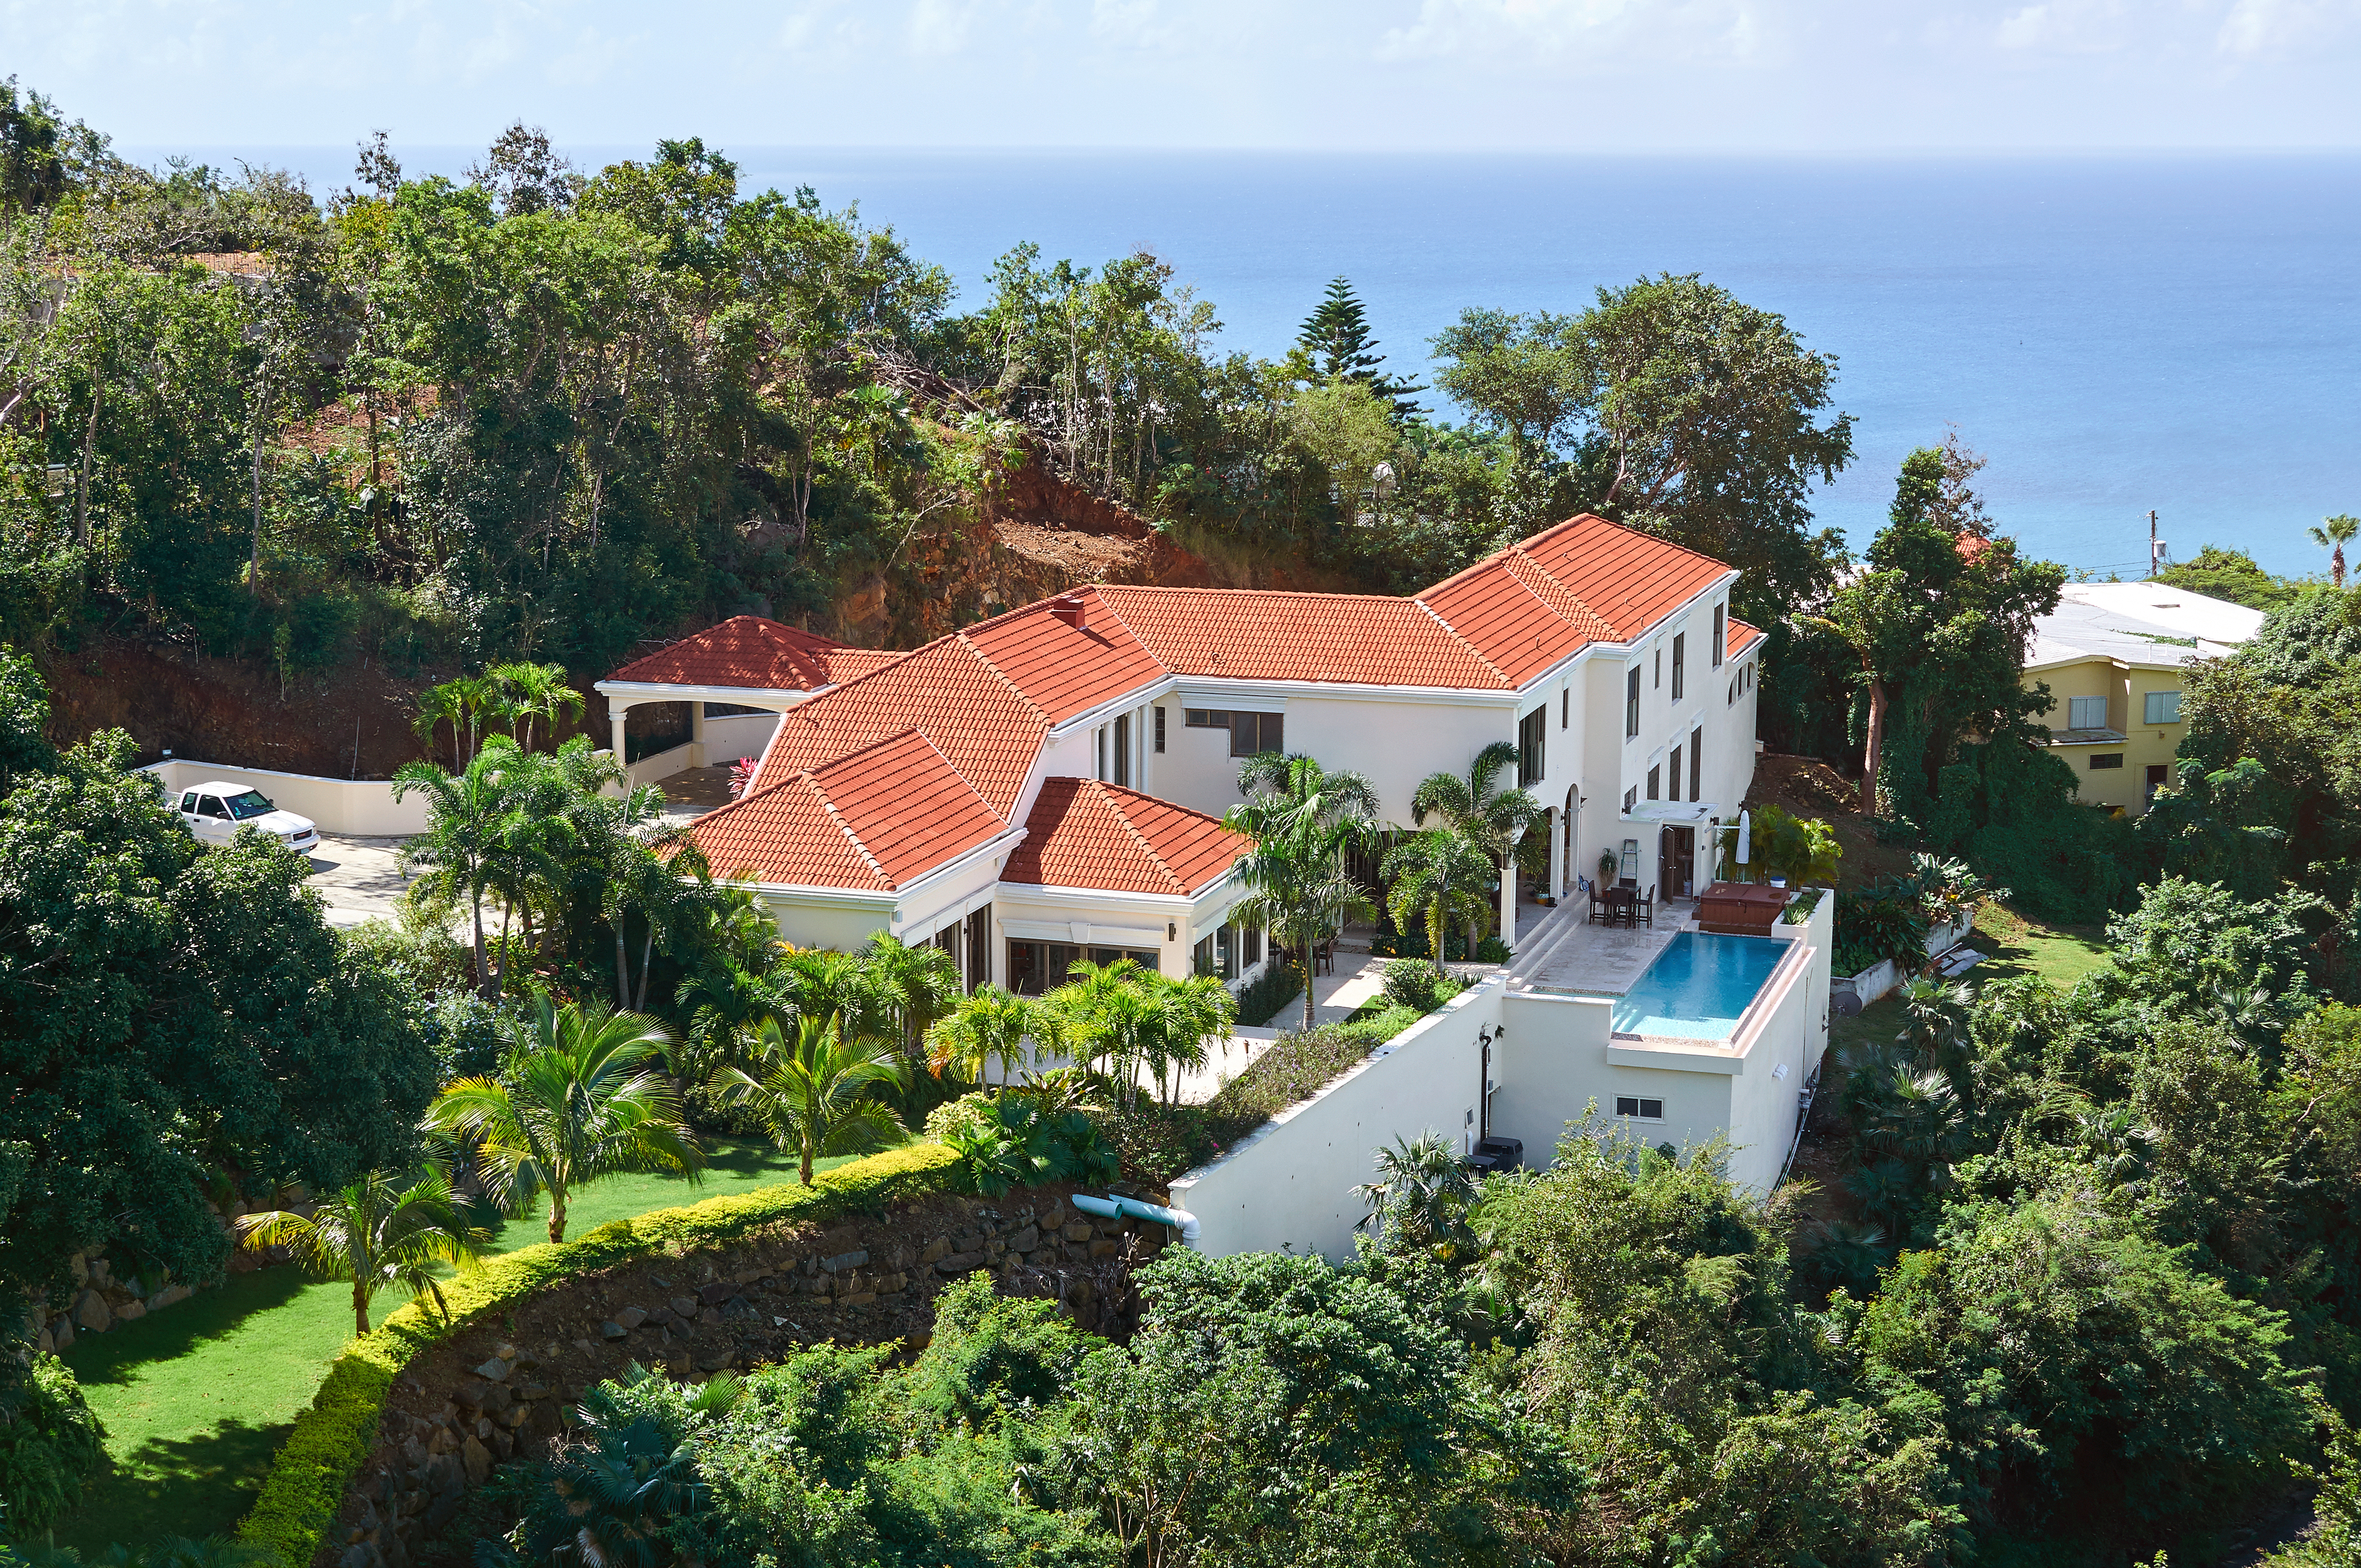 A mansion by the coast | Source: Shutterstock